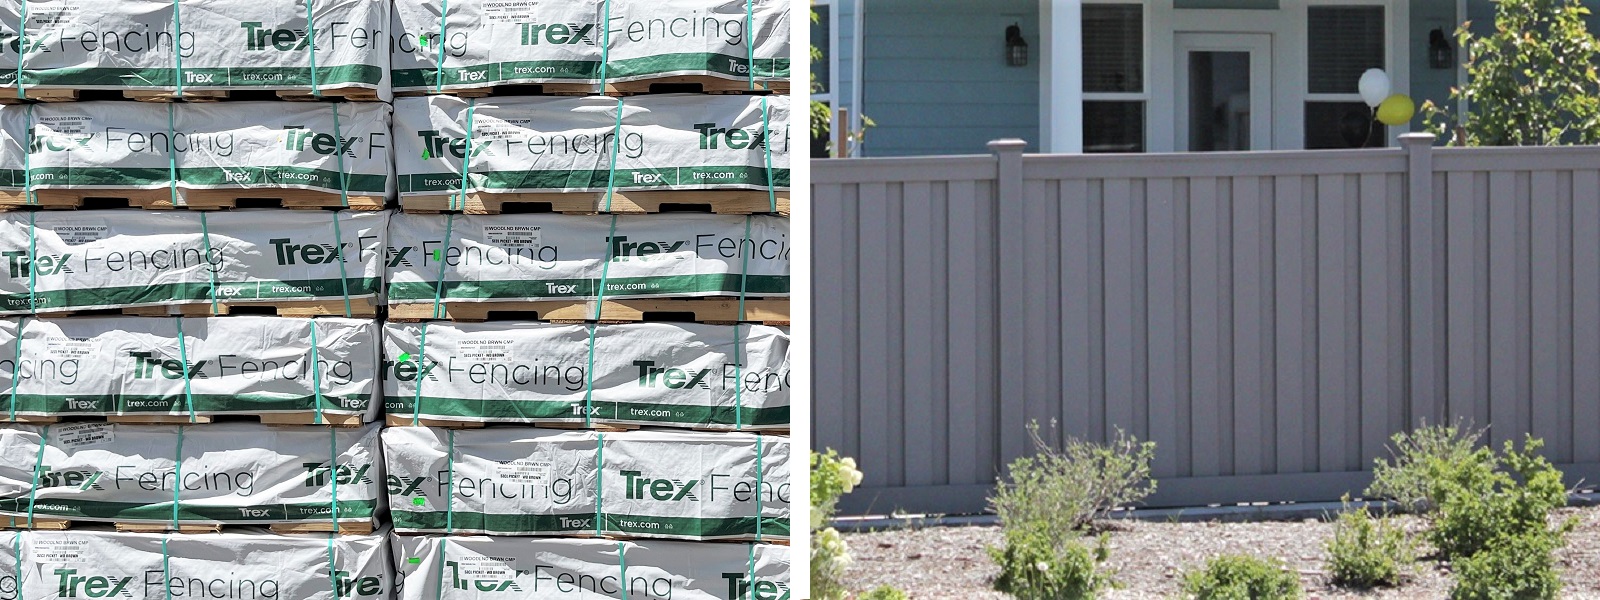 Trex Fence Seclusions materials stacked and covered on pallets with a collage of an installed fence